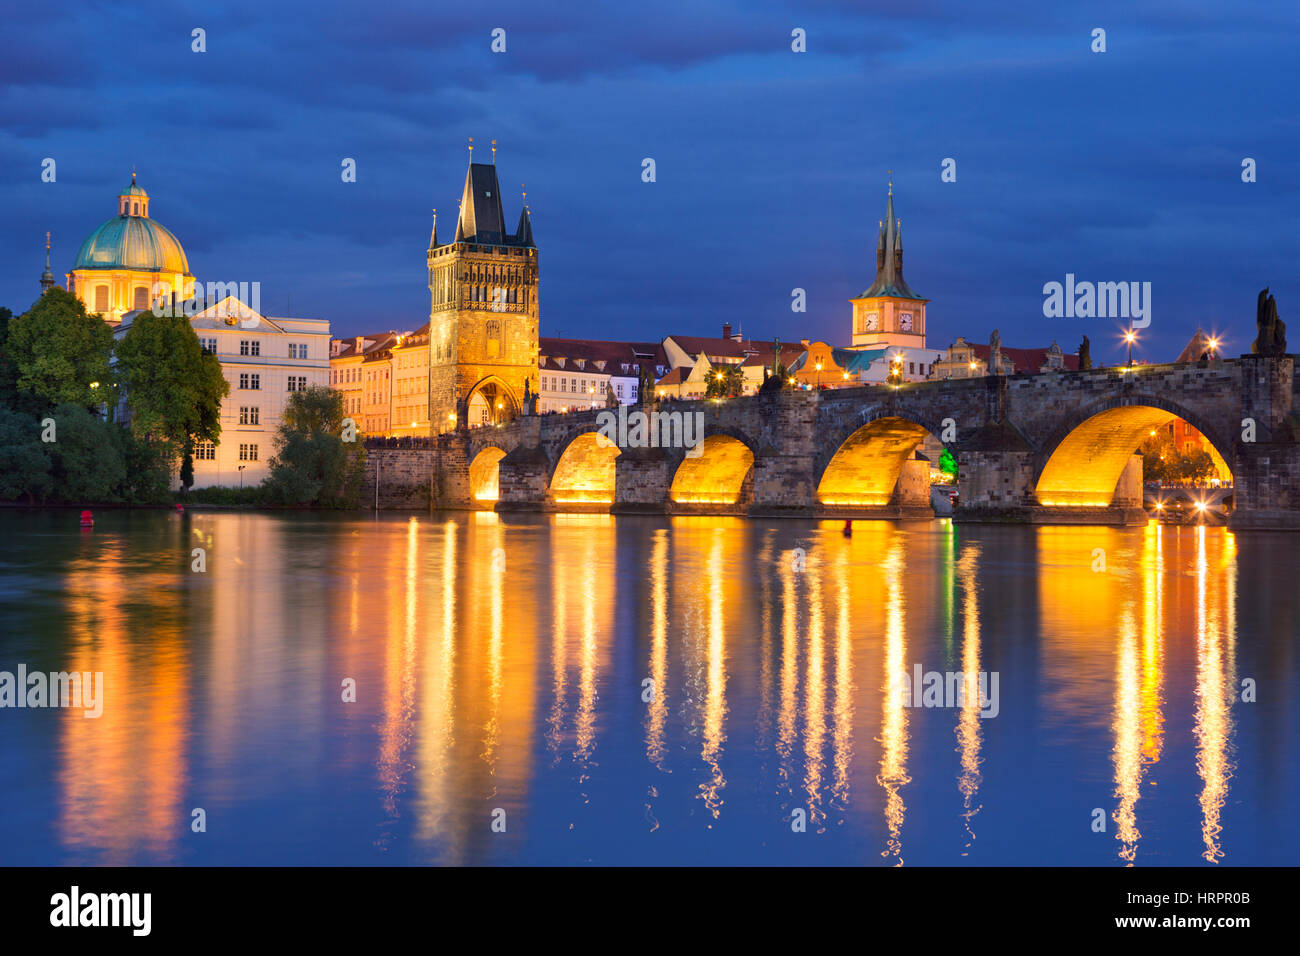 The Charles Bridge over the Vltava River in Prague, Czech Republic, photographed at night. Stock Photo